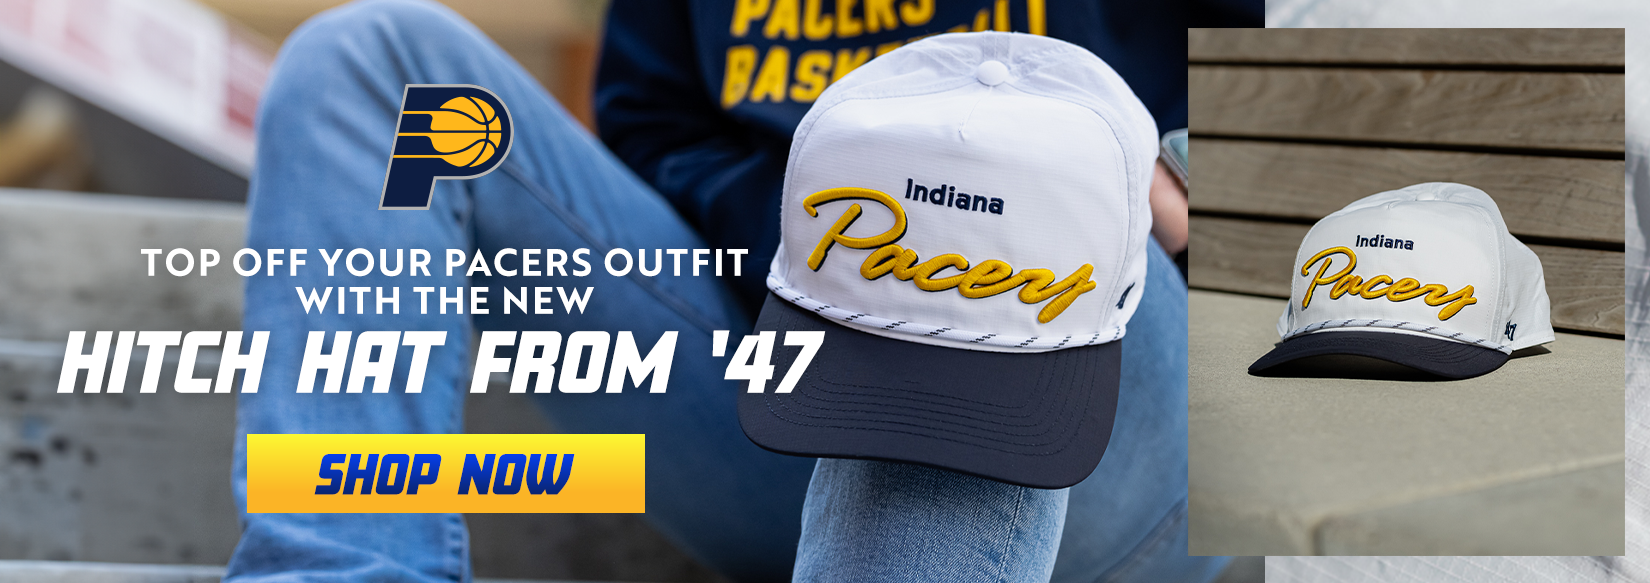 Official Women's Indiana Pacers Gear, Womens Pacers Apparel